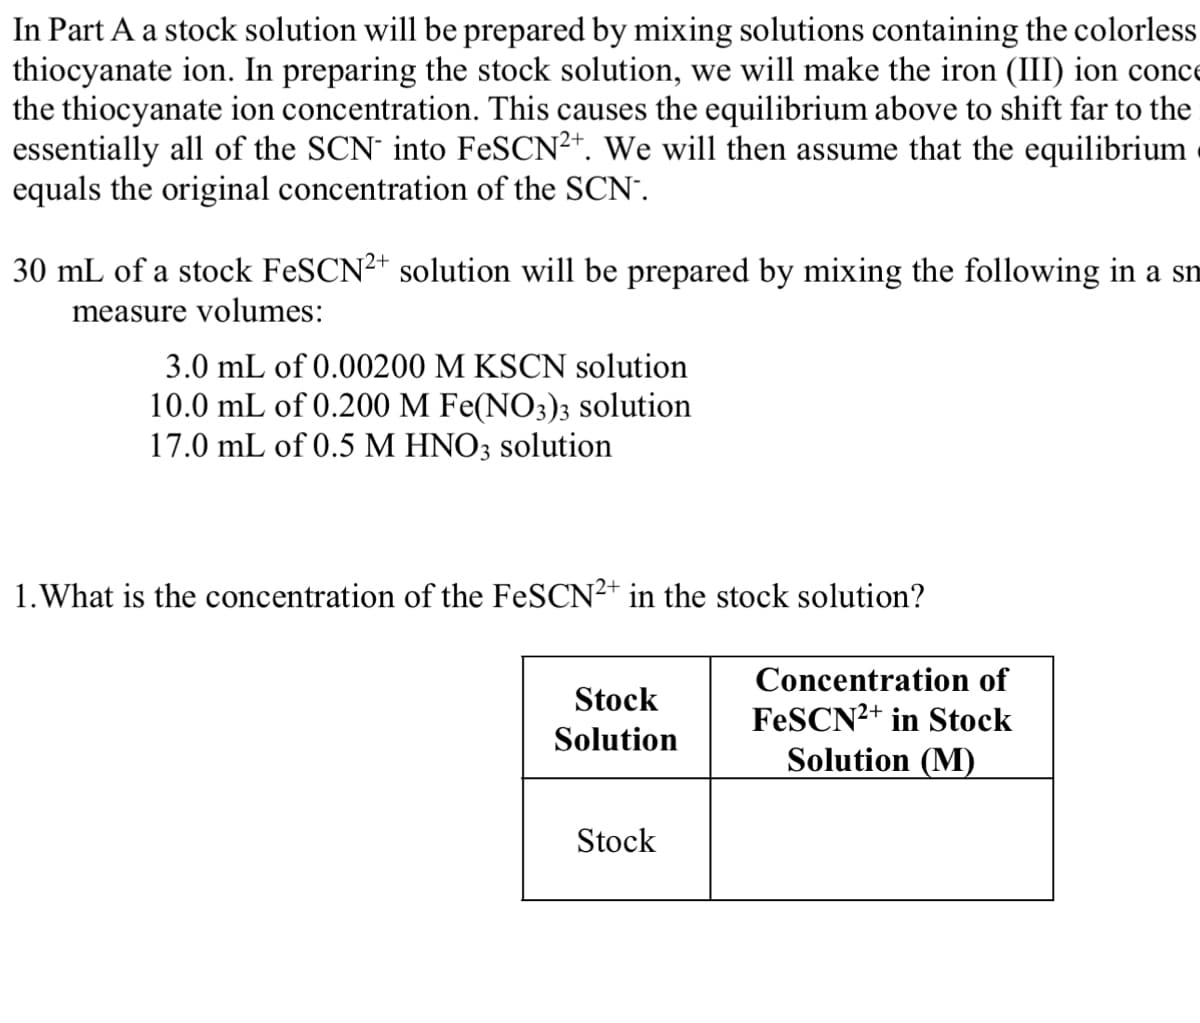 In Part A a stock solution will be prepared by mixing solutions containing the colorless
thiocyanate ion. In preparing the stock solution, we will make the iron (III) ion conce
the thiocyanate ion concentration. This causes the equilibrium above to shift far to the
essentially all of the SCN into FeSCN²+. We will then assume that the equilibrium
equals the original concentration of the SCN.
30 mL of a stock FeSCN2+ solution will be prepared by mixing the following in a sm
measure volumes:
3.0 mL of 0.00200 M KSCN solution
10.0 mL of 0.200 M Fe(NO3)3 solution
17.0 mL of 0.5 M HNO3 solution
1. What is the concentration of the FeSCN2+ in the stock solution?
Stock
Solution
Stock
Concentration of
FeSCN2+ in Stock
Solution (M)